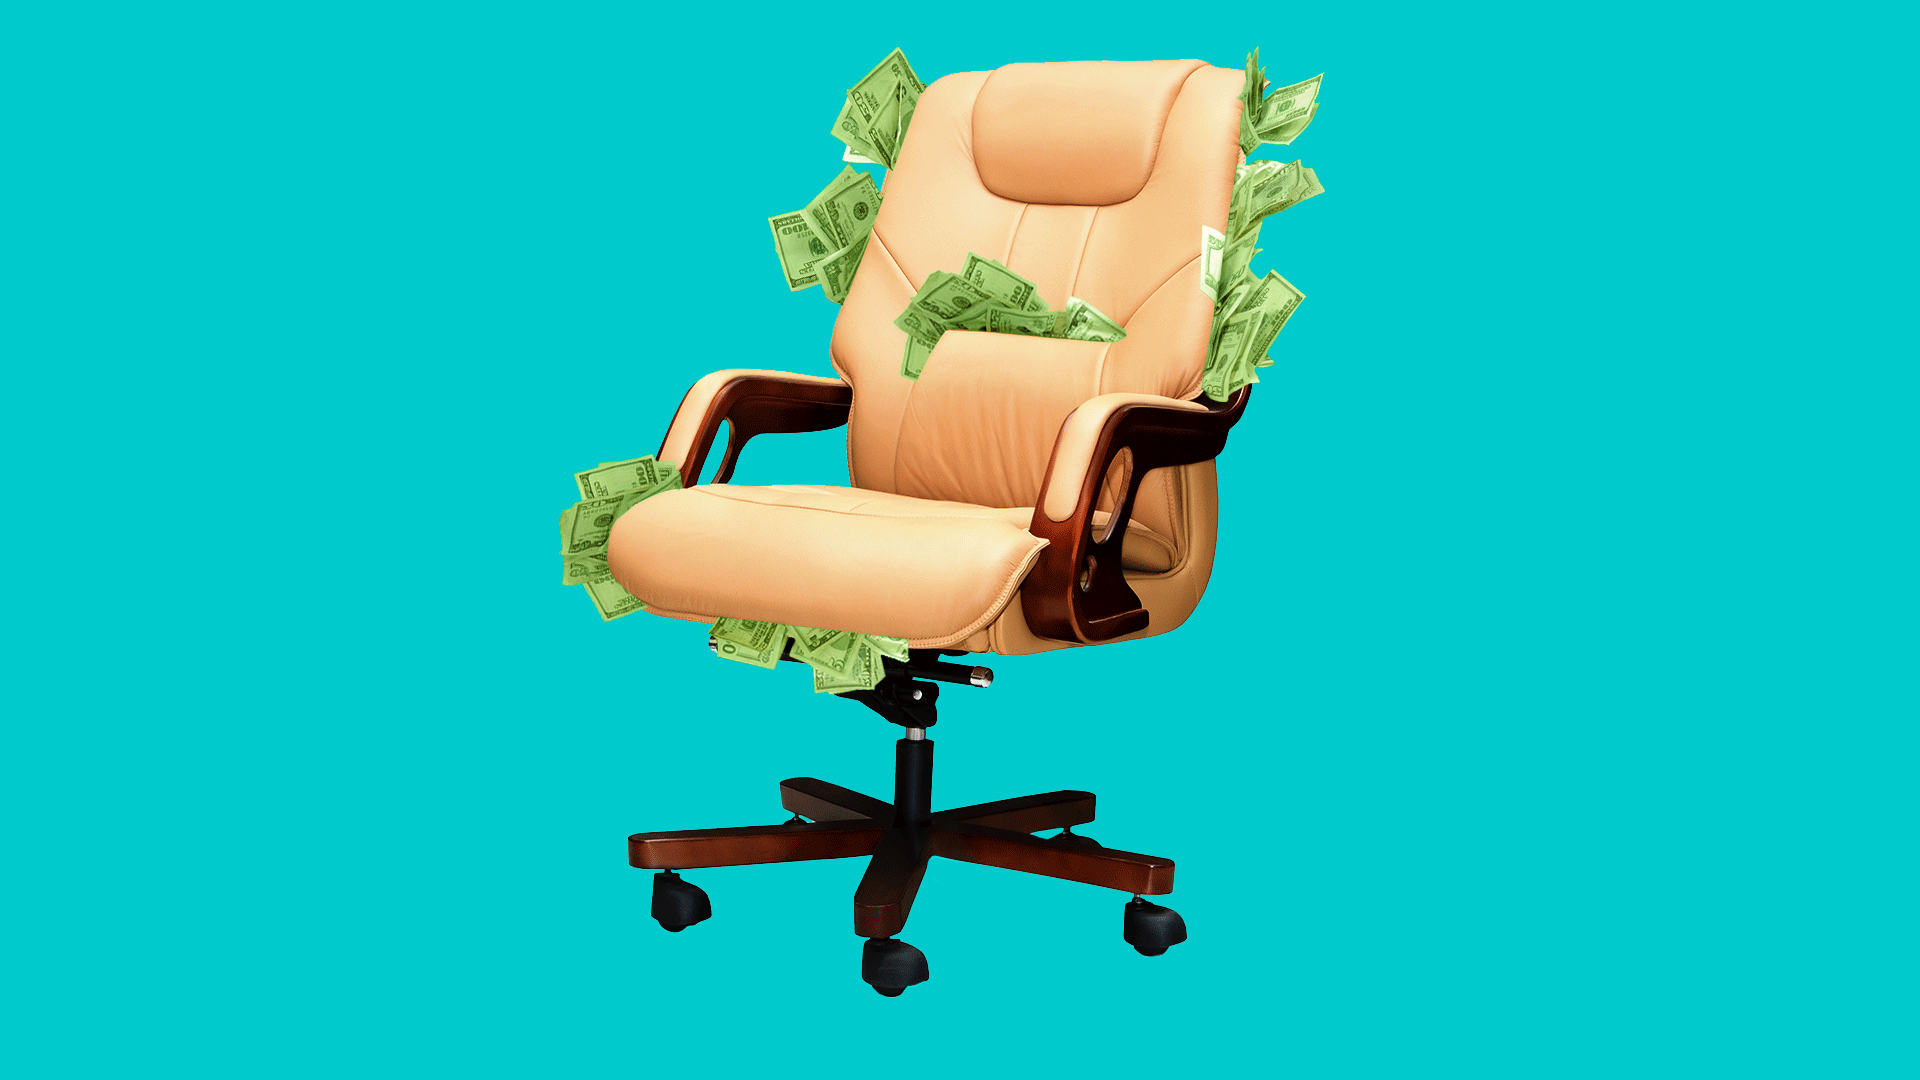 In this illustration, a beige office chair is overstuffed with money in front of a turquoise background.